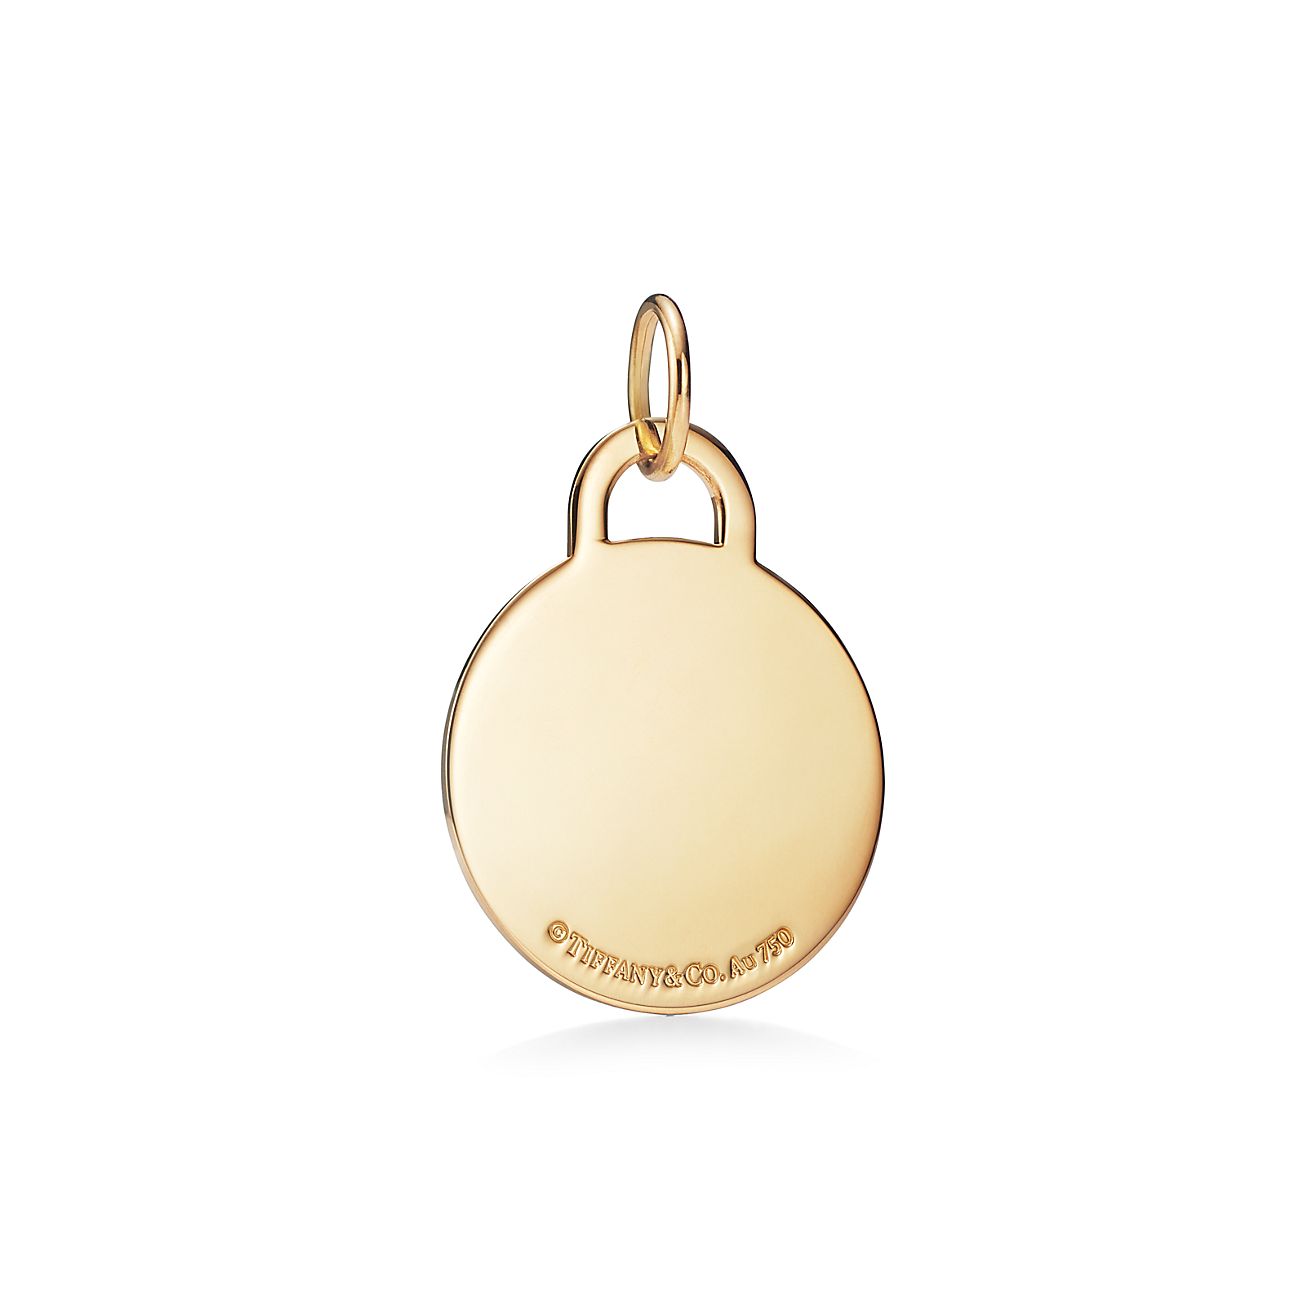 Tiffany Charms round tag charm in 18k 